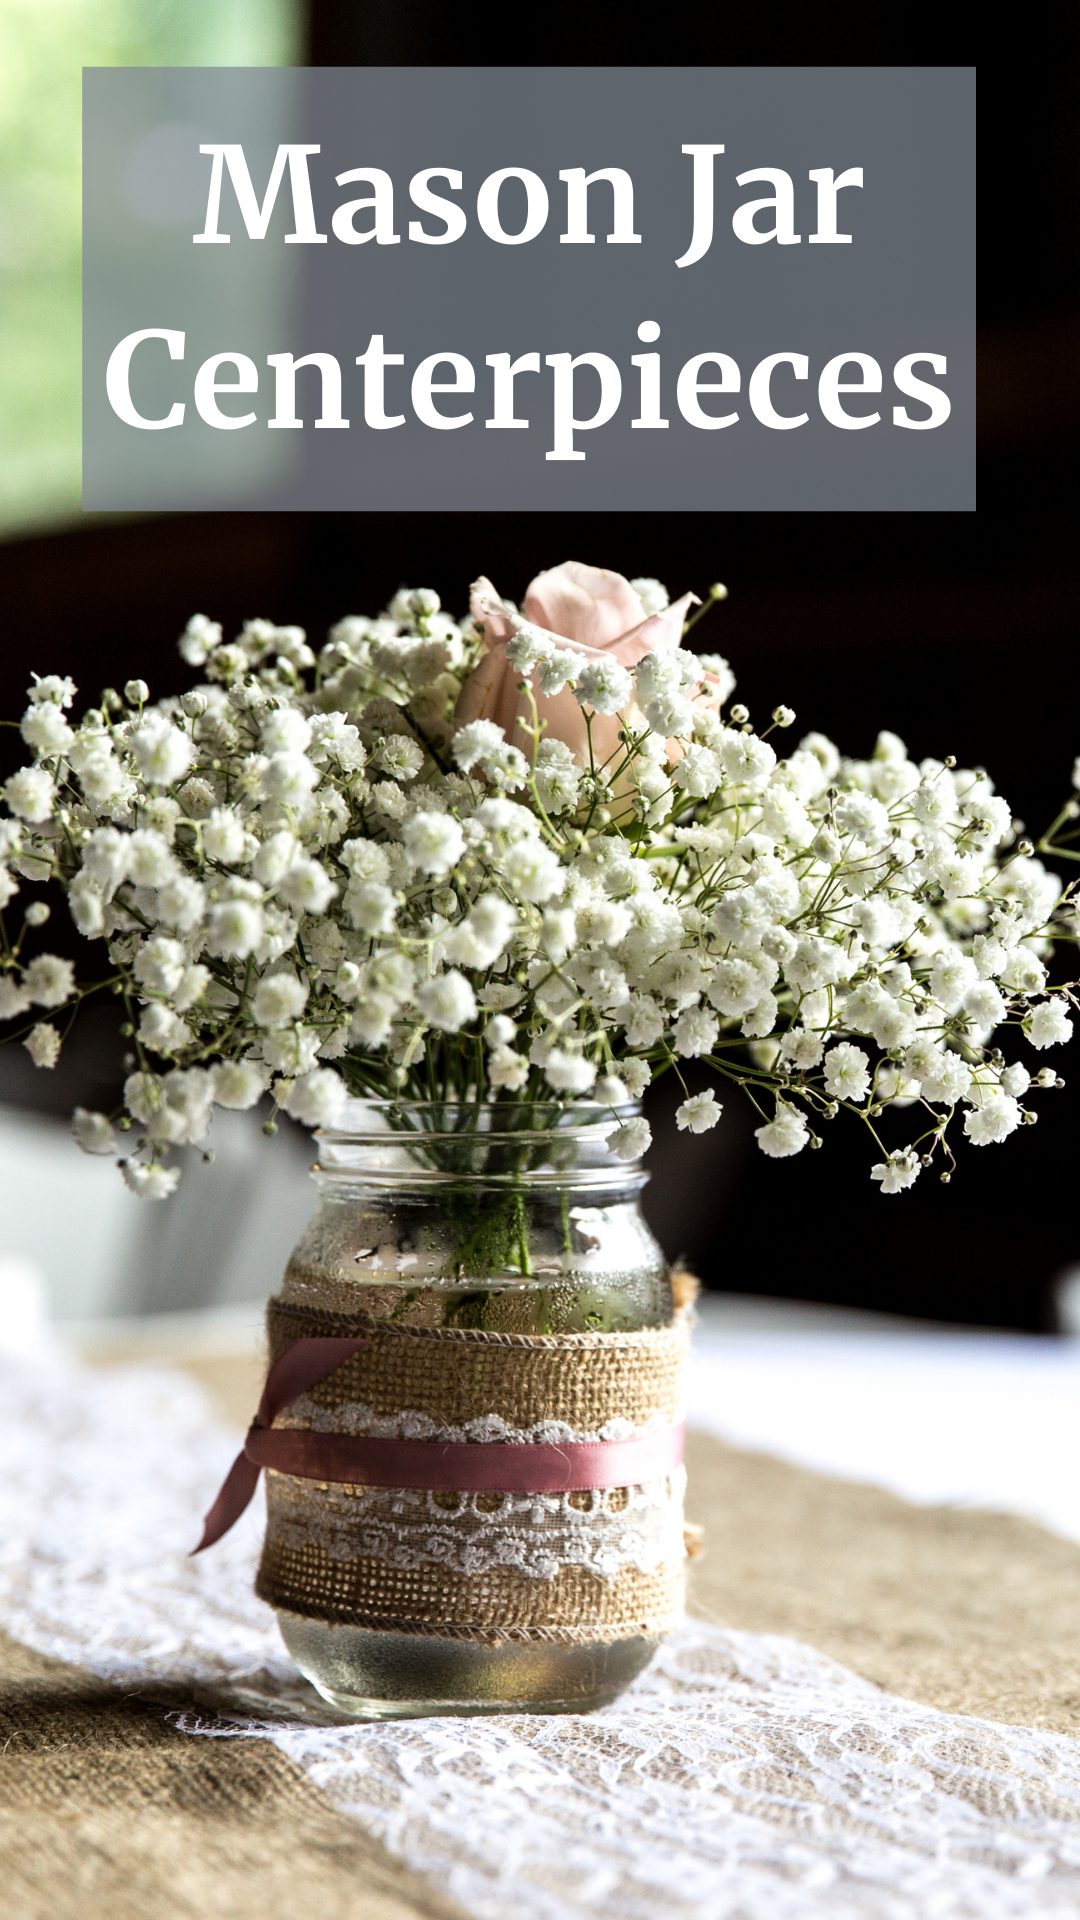 These easy and inexpensive Mason jar centerpieces are a lovely way to decorate your home, garden or wedding table. Get full tutorial and tips on our site! #masonjarcenterpieces #weddingcenterpieces #diymasonjarcarfts #masonjarcarfts #diyweddingdecor #weddingdecorideas via @jennymelrose